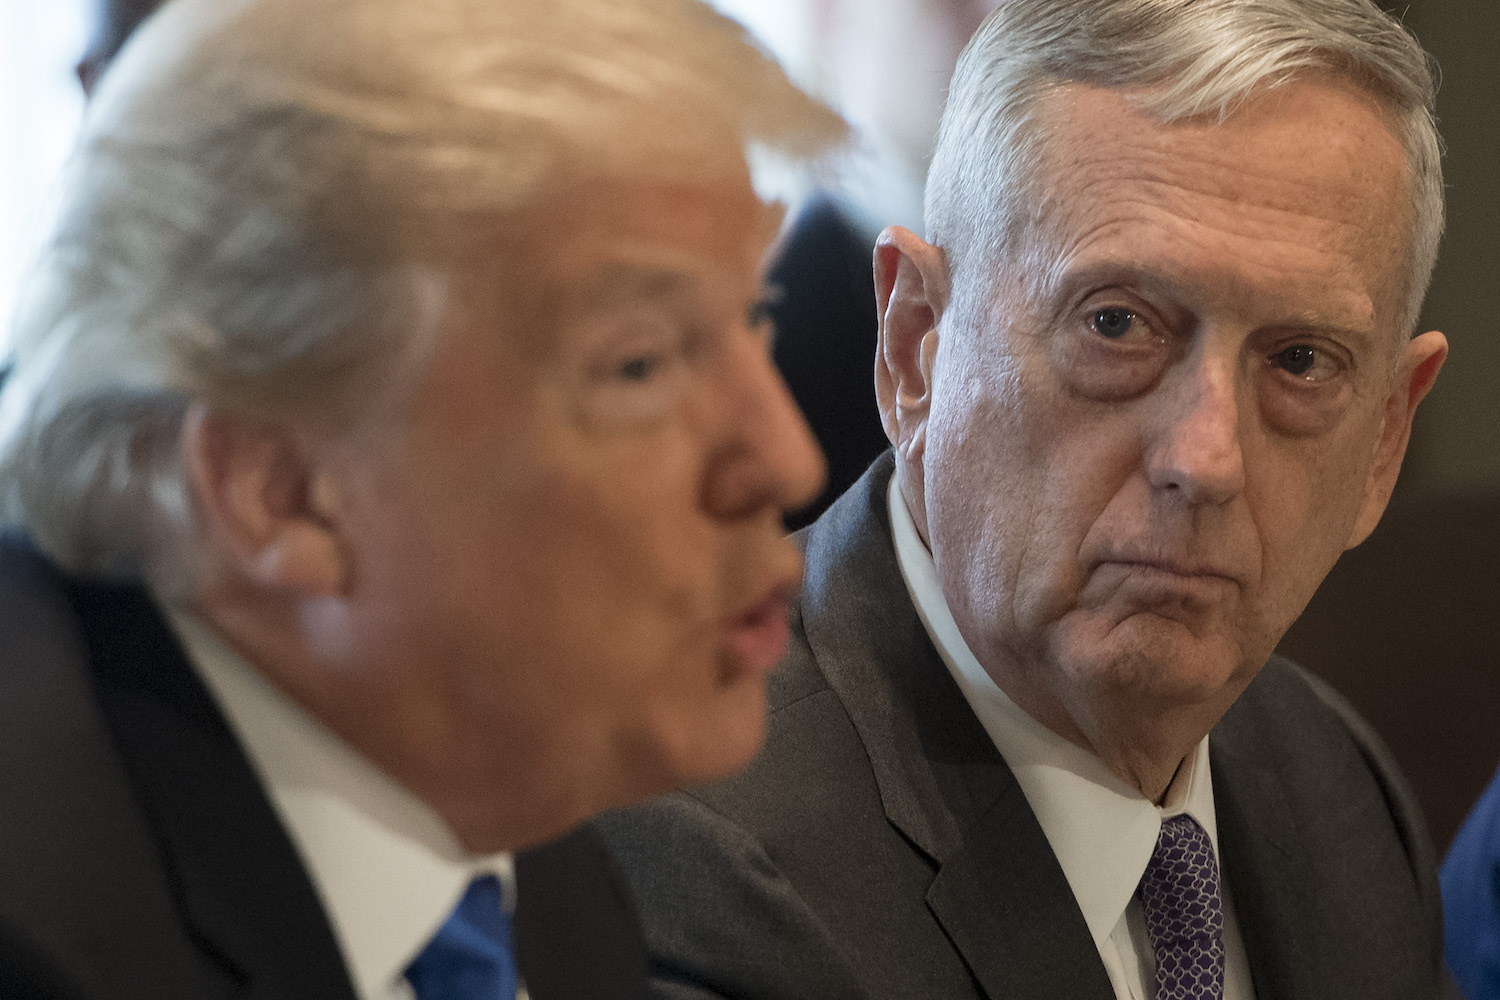 Trump says Mattis 'could be' leaving as US defense chief